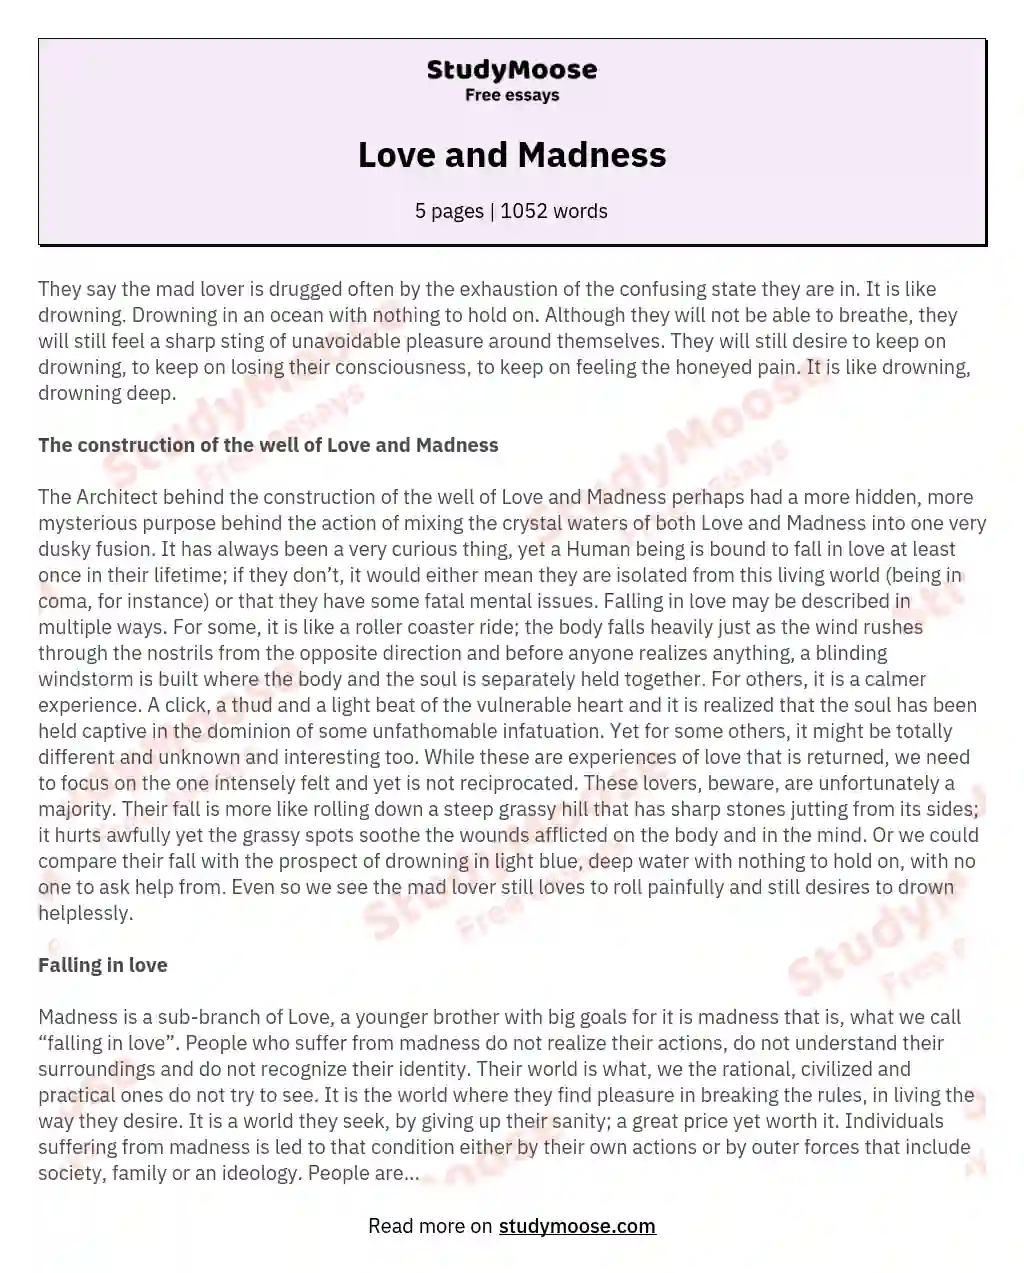 Love and Madness essay